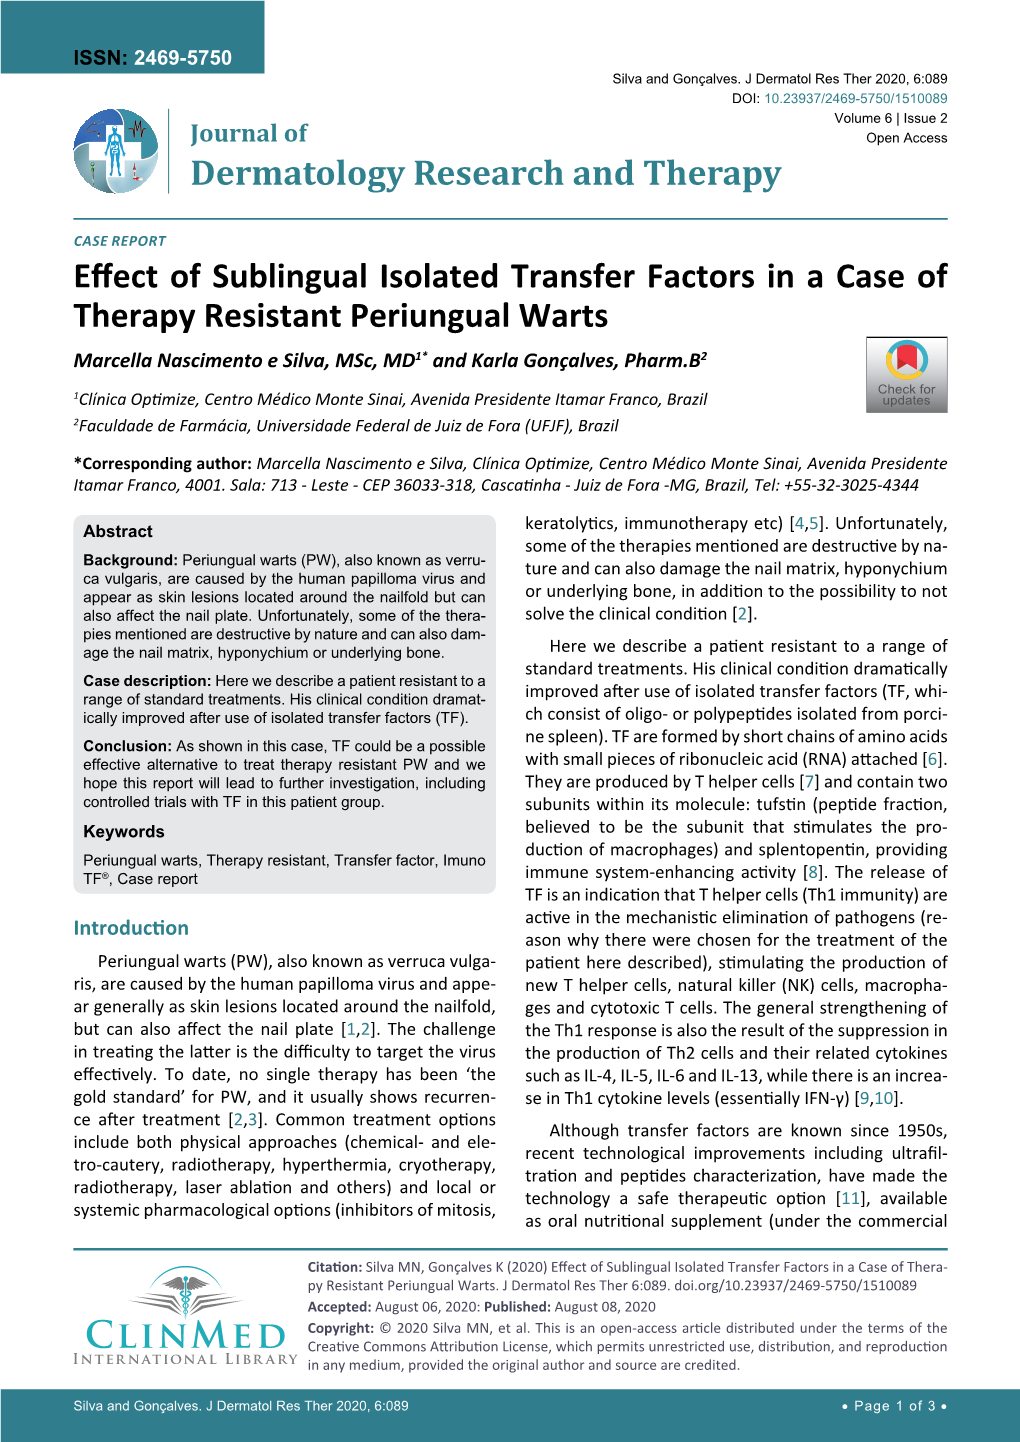 Effect of Sublingual Isolated Transfer Factors in a Case of Therapy